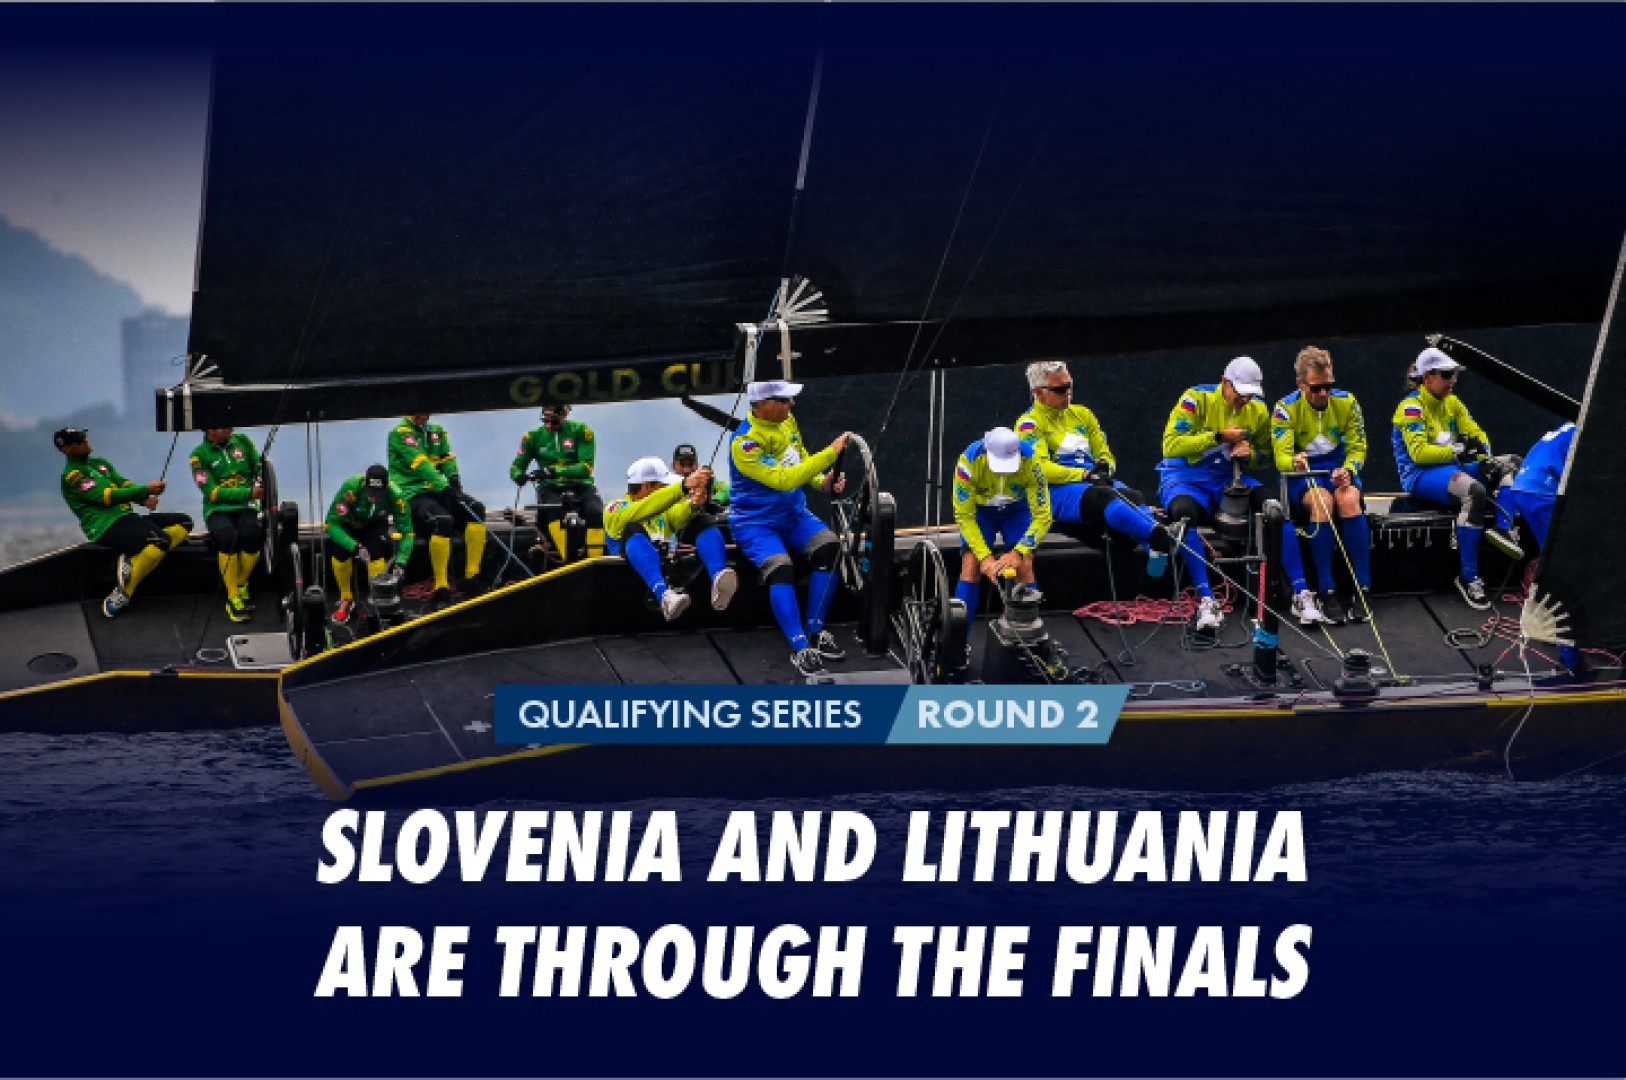 SSL Gold Cup: Slovenia and Lithuania are through the finals